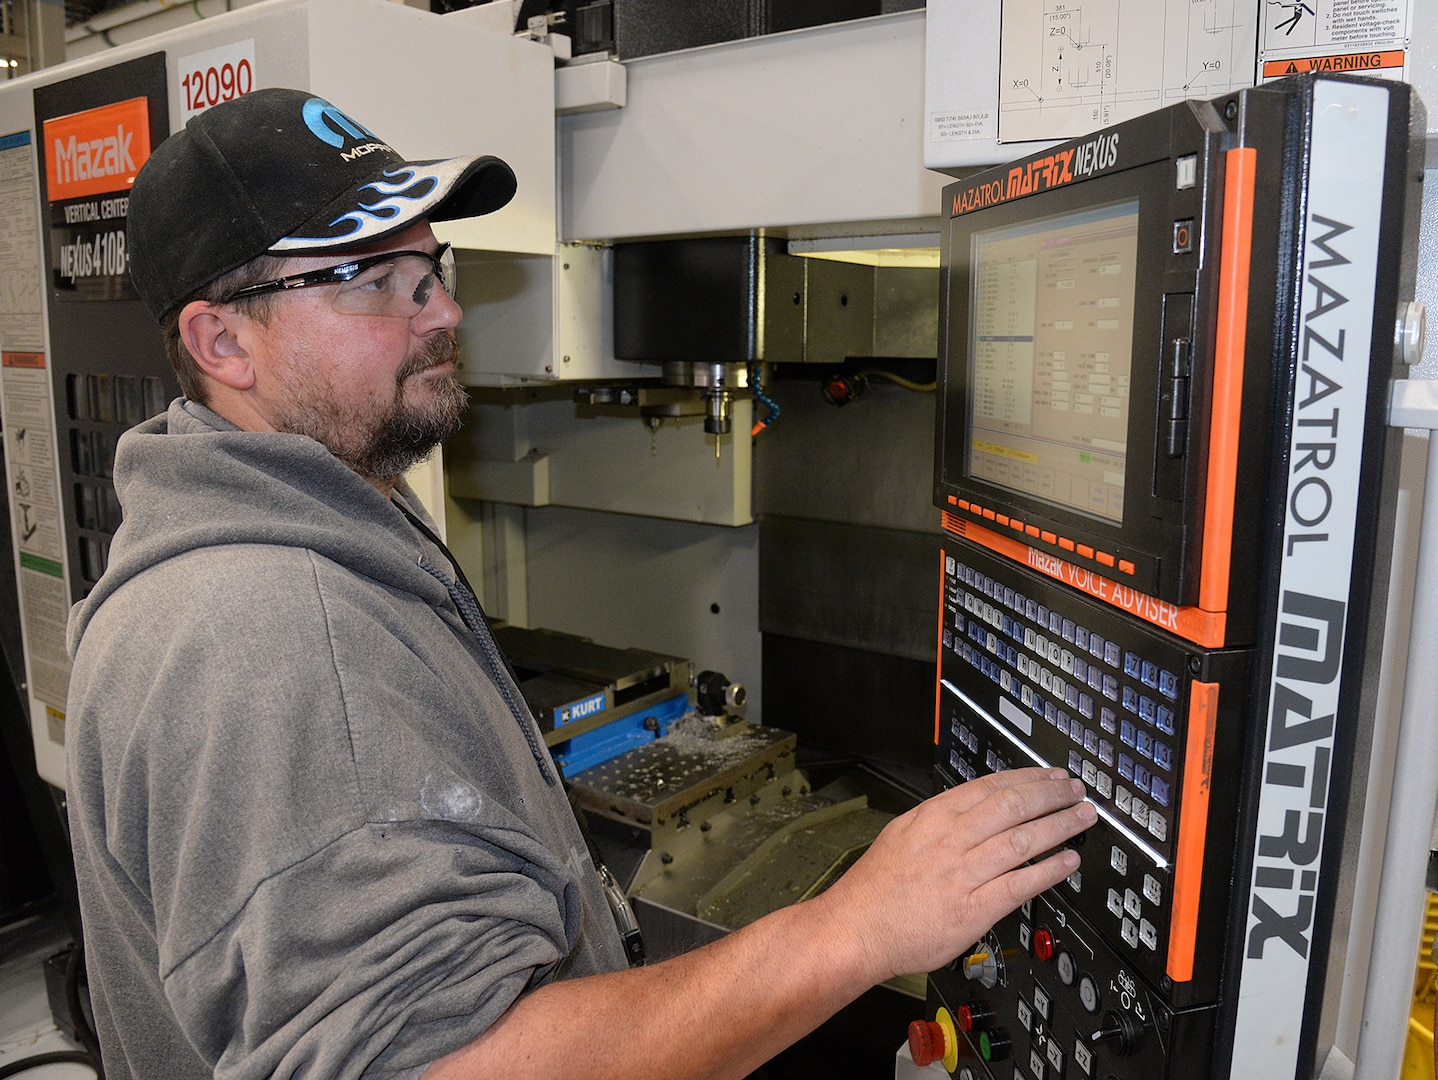 Troy Jolley, 533rd Commodities Maintenance Squadron, programs a Mazak machine May 5, 2020, at Hill Air Force Base, Utah. The skilled engineers and technicians of the 533rd CMMXS in the Ogden Air Logistics Complex, design, prototype and manufacture thousands of critical components annually, that can’t be found anywhere else in the world. The parts are manufactured in order to bridge a gap in the regular supply system, when there’s no contract in place from an outside source.